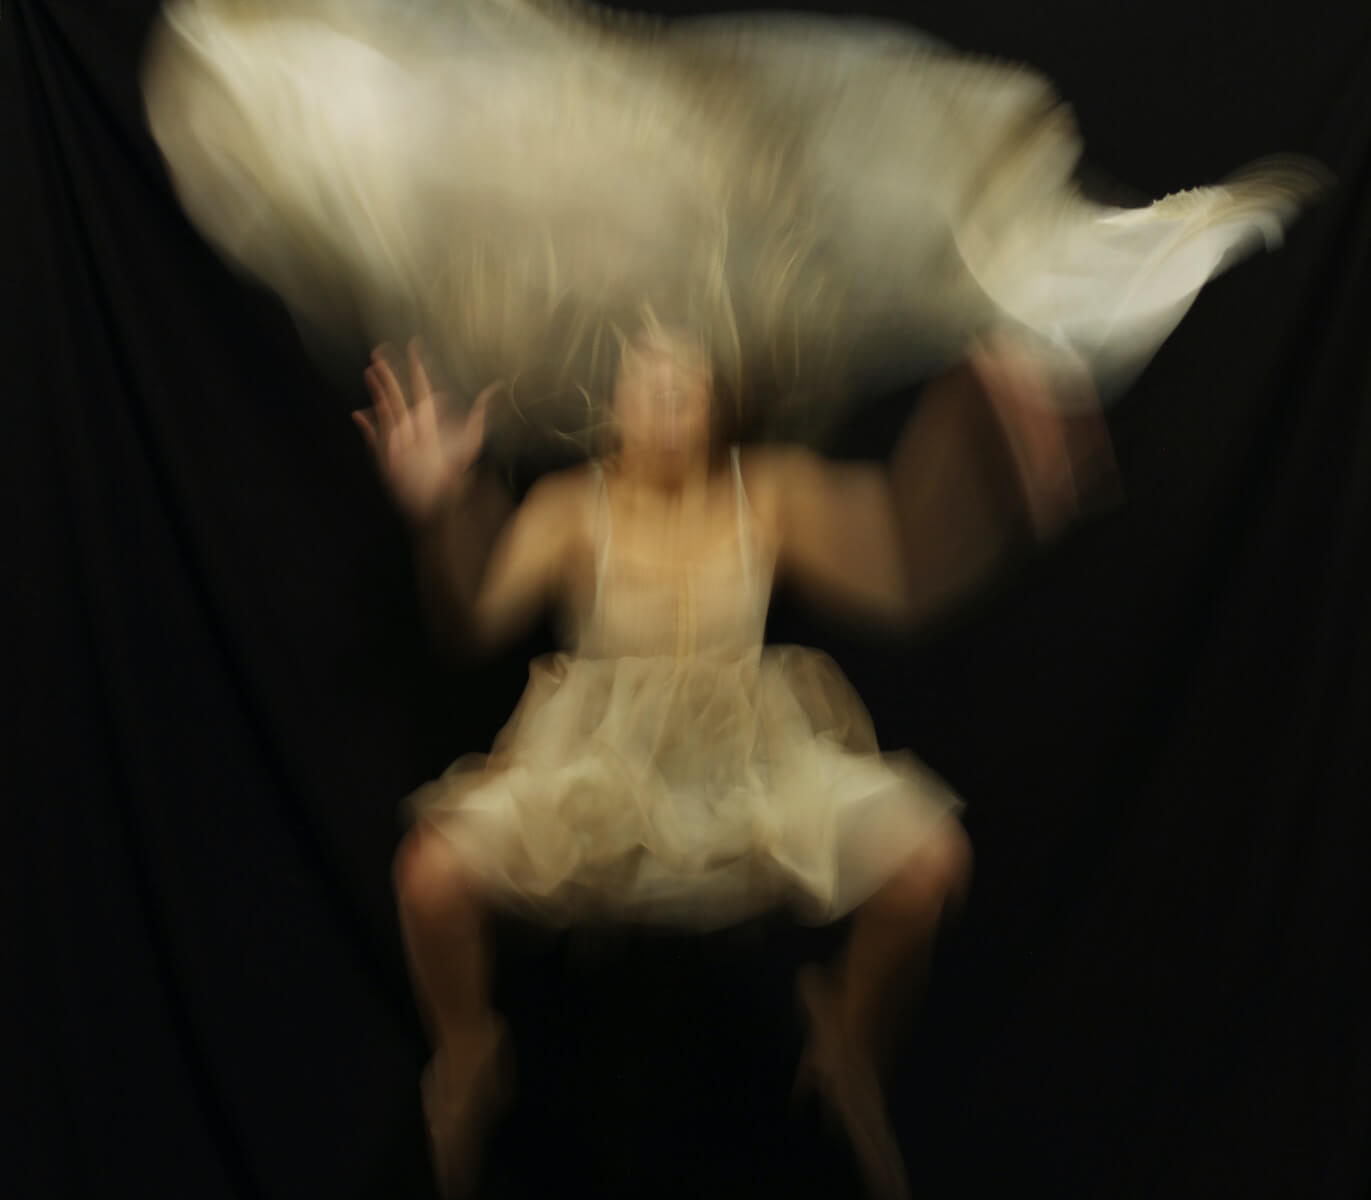 a blurry photo of a woman sitting on a chair